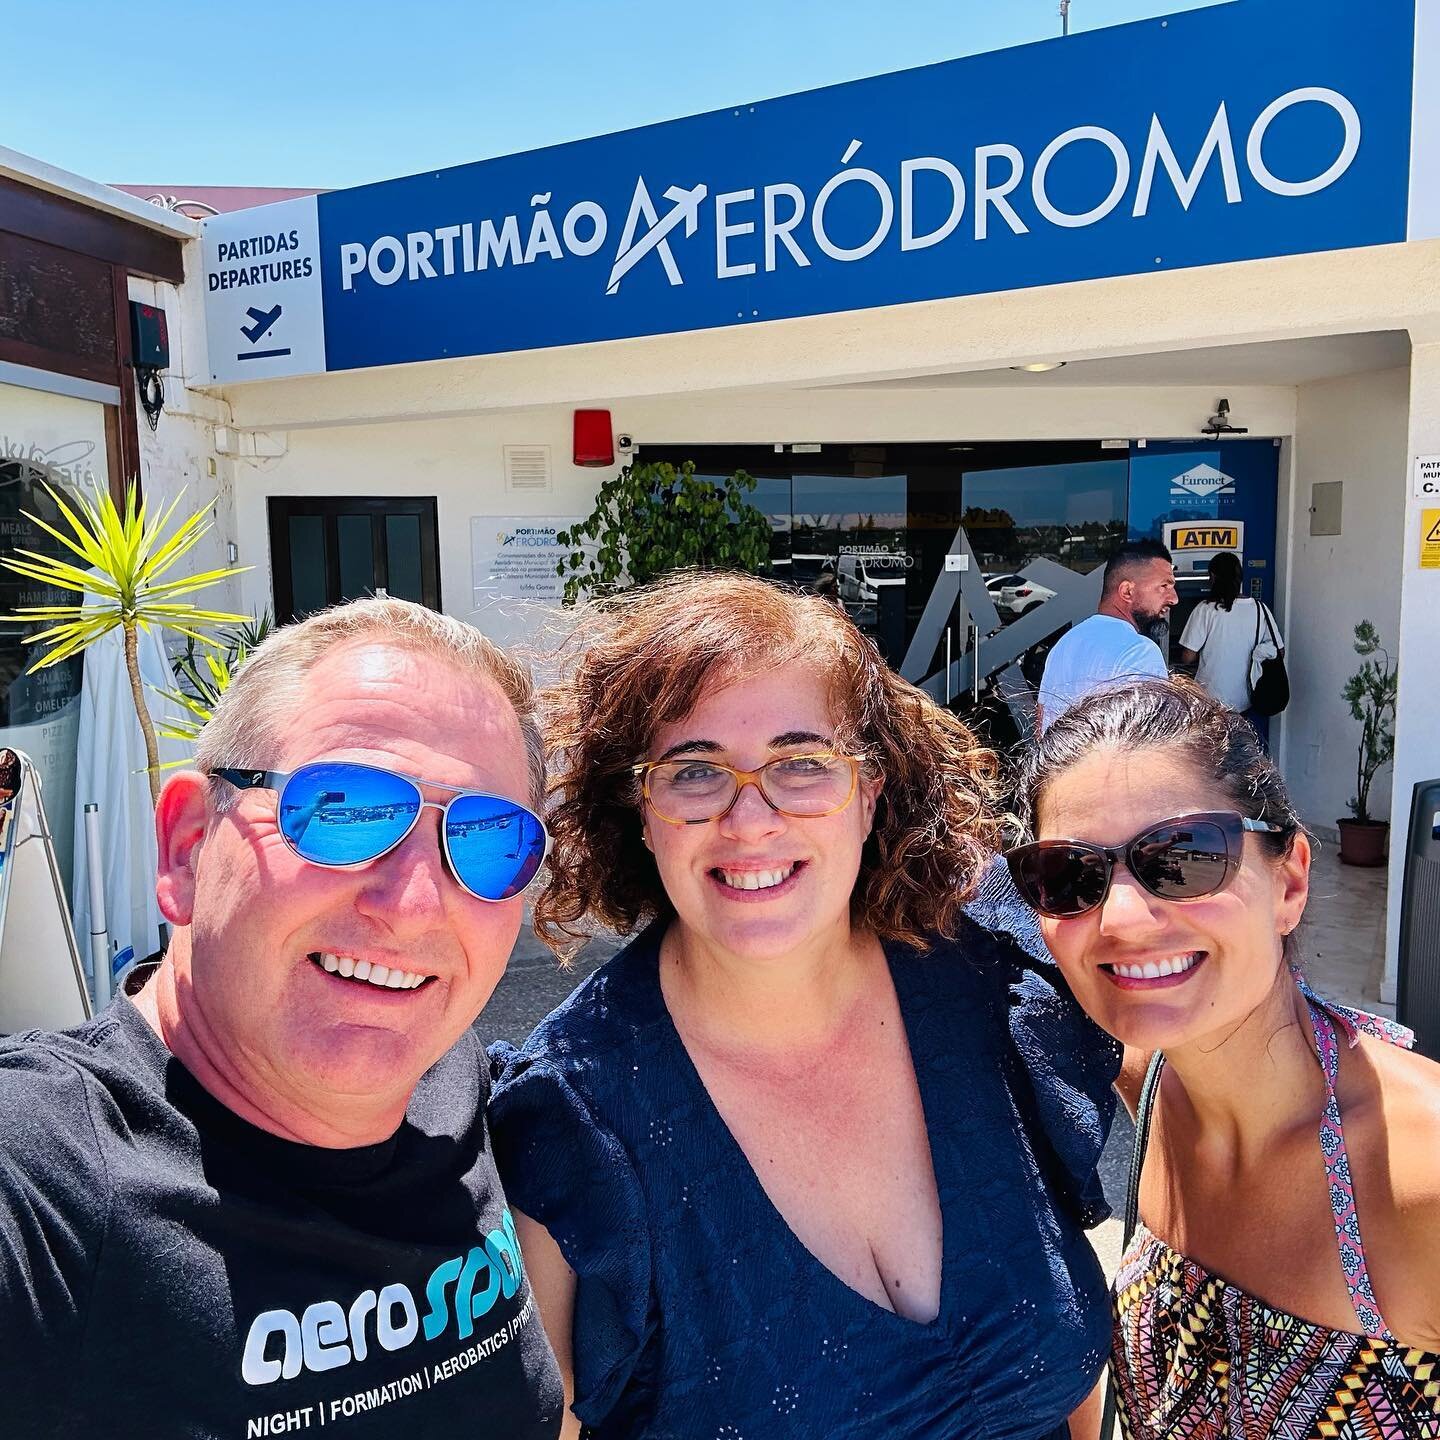 Great to meet everyone at #portimeo airport 🙏 Thank you for your hospitality let&rsquo;s hope we can bring @aerosparx  to the @visitalgarve @algarve_portugal_ @portugalairsummit @portugalairborne @visitporto @portugal